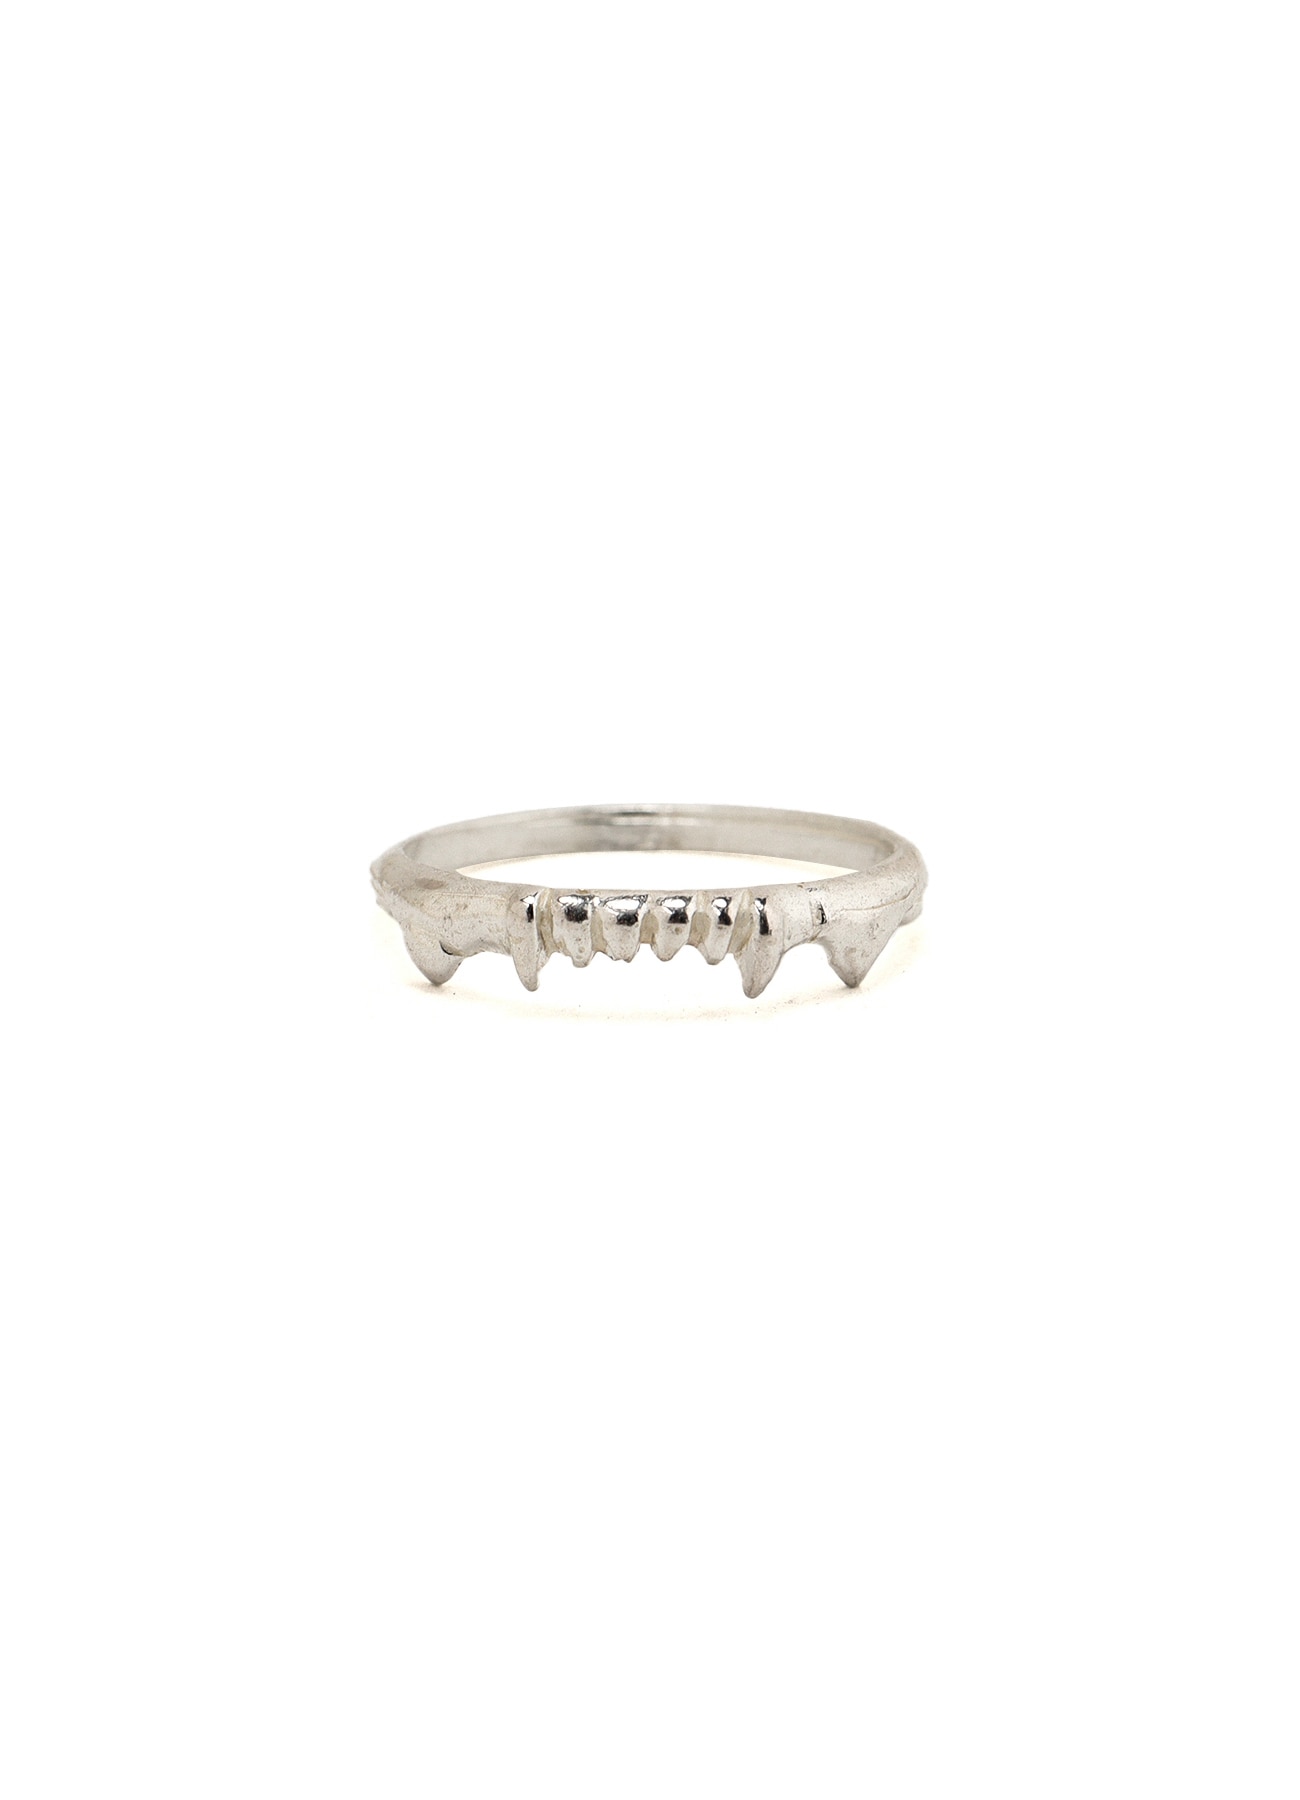 SILVER925 DOG TOOTH RING